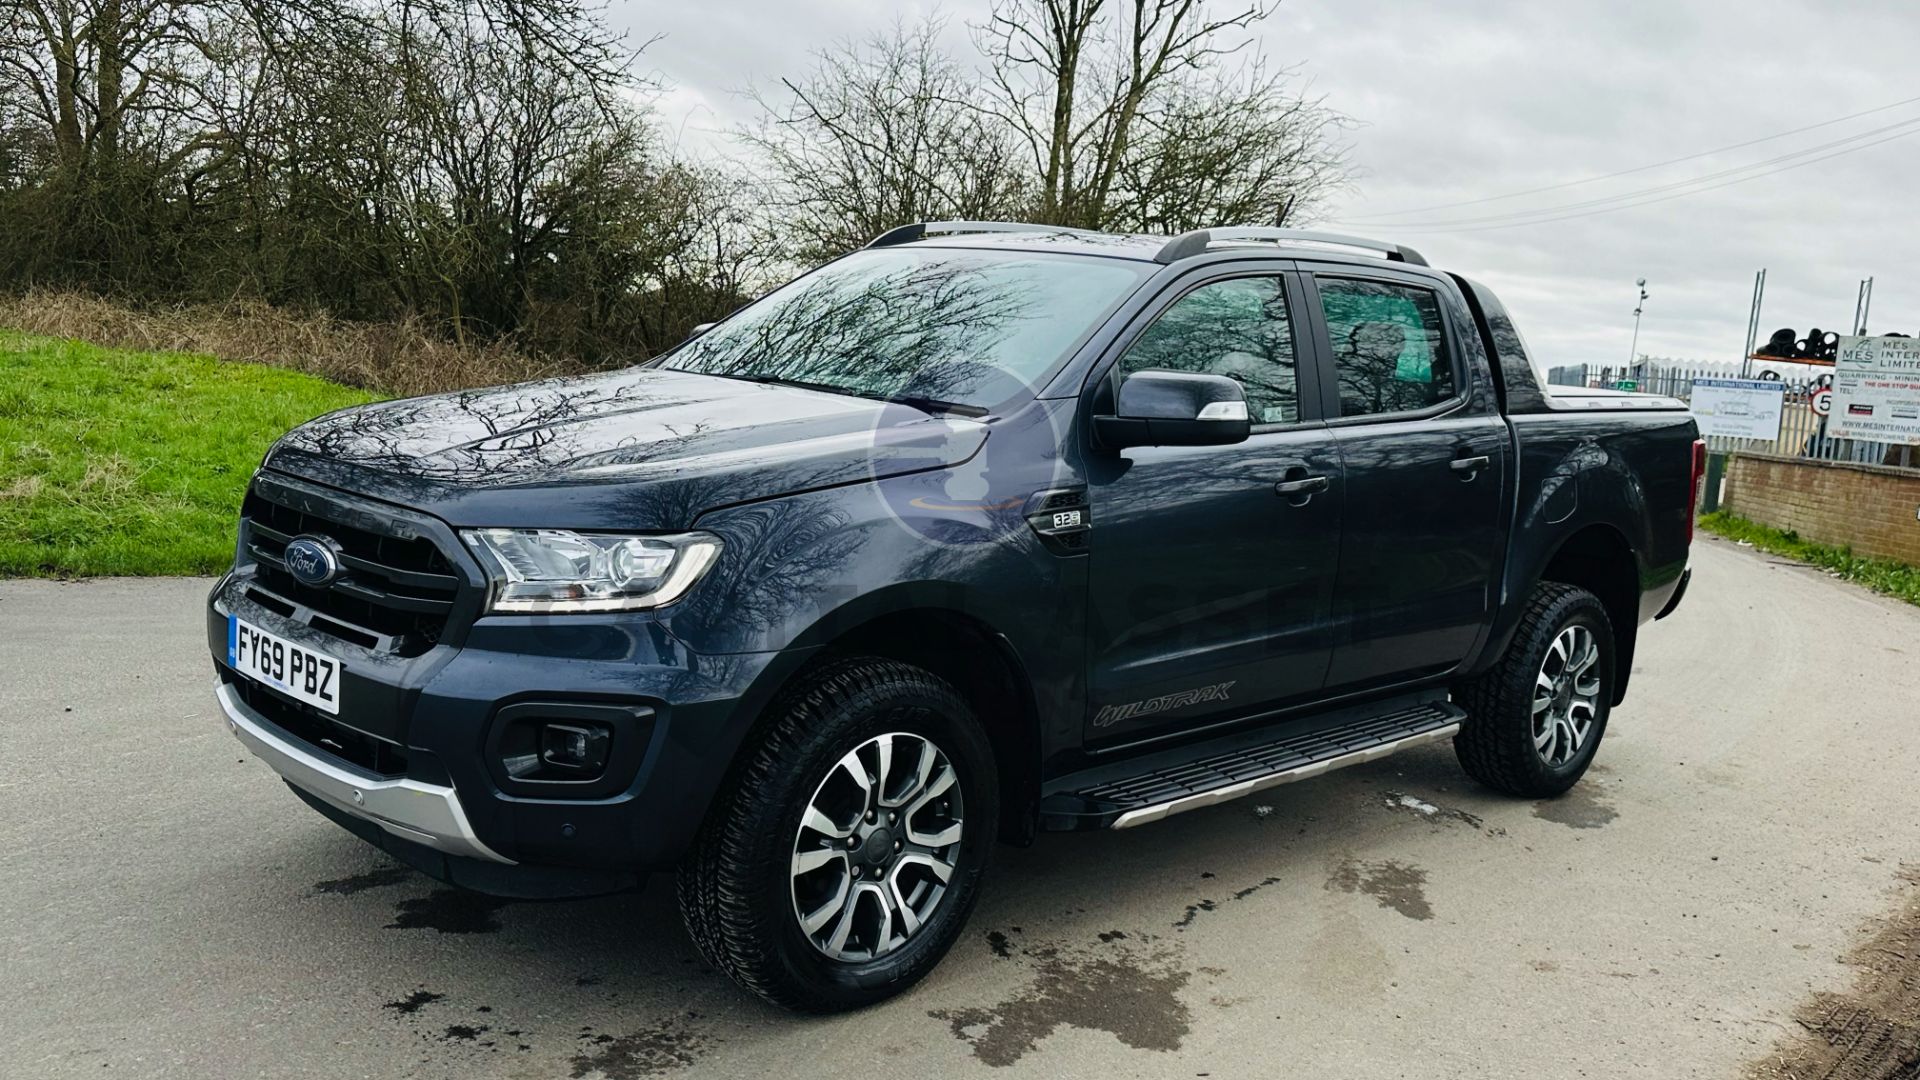 FORD RANGER *WILDTRAK EDITION* DOUBLE CAB PICK-UP (2020 - EURO 6) 3.2 TDCI - AUTOMATIC *HUGE SPEC* - Image 6 of 49